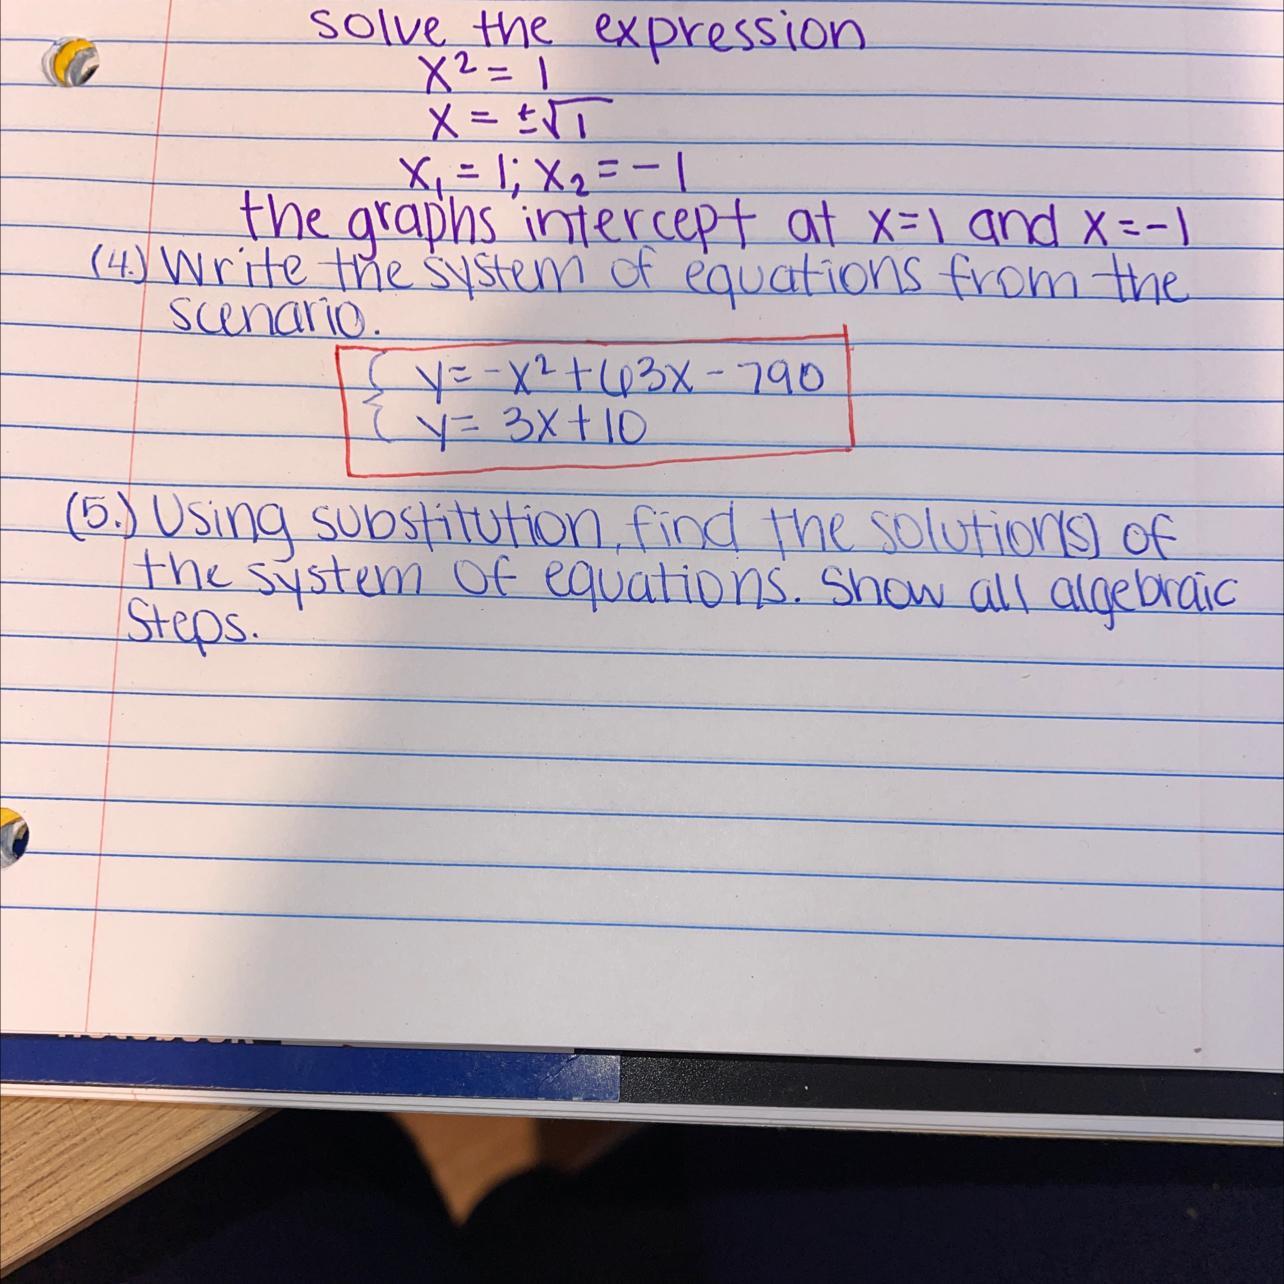 The Equations In The Red Box I Need To Use Substitution. Explaining The Steps As I Go. 